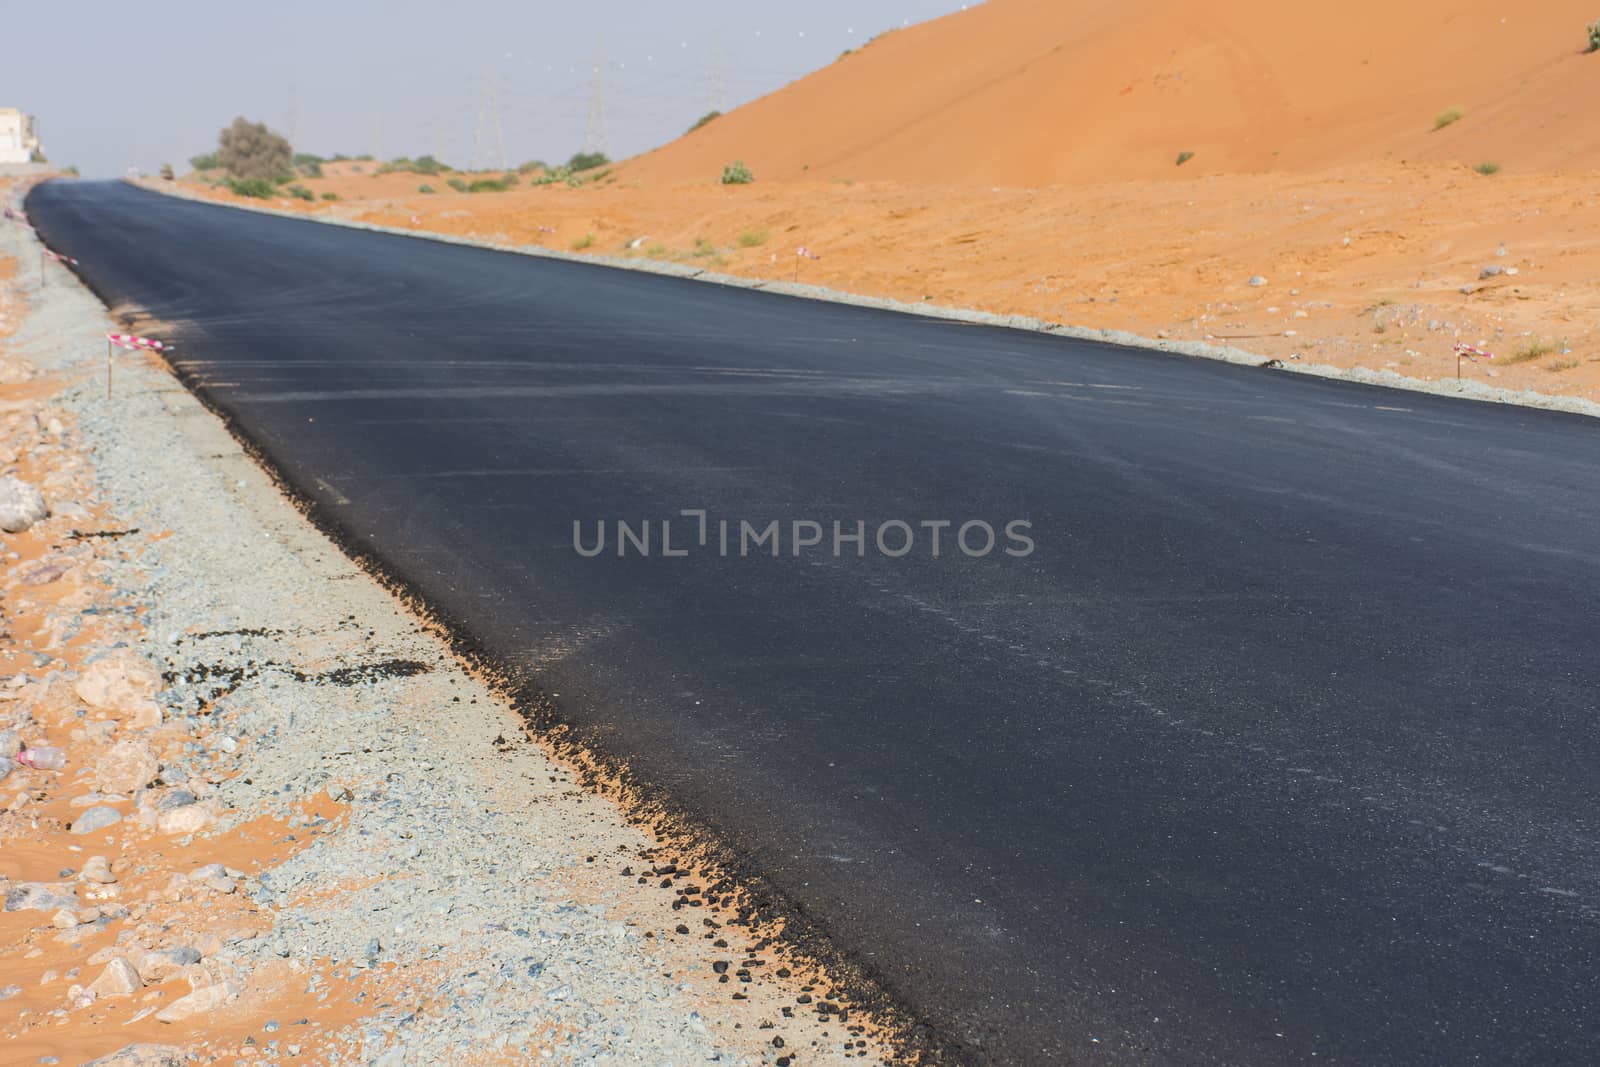 New ashphalt road in the desert sand with no cars or people. Contruction, desolate, hot, arid concepts.